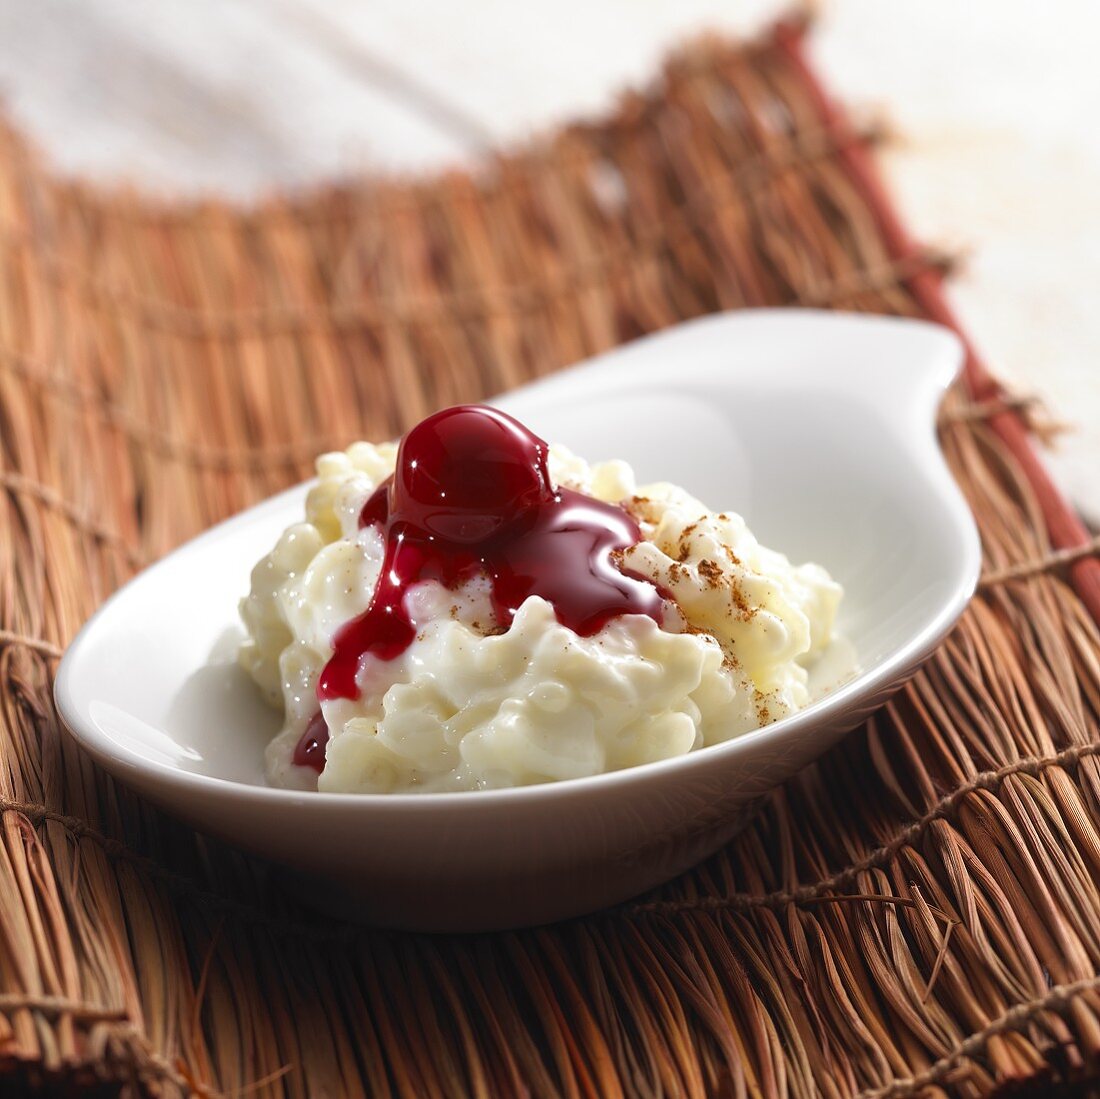 Rice pudding with cherry compote and cinnamon